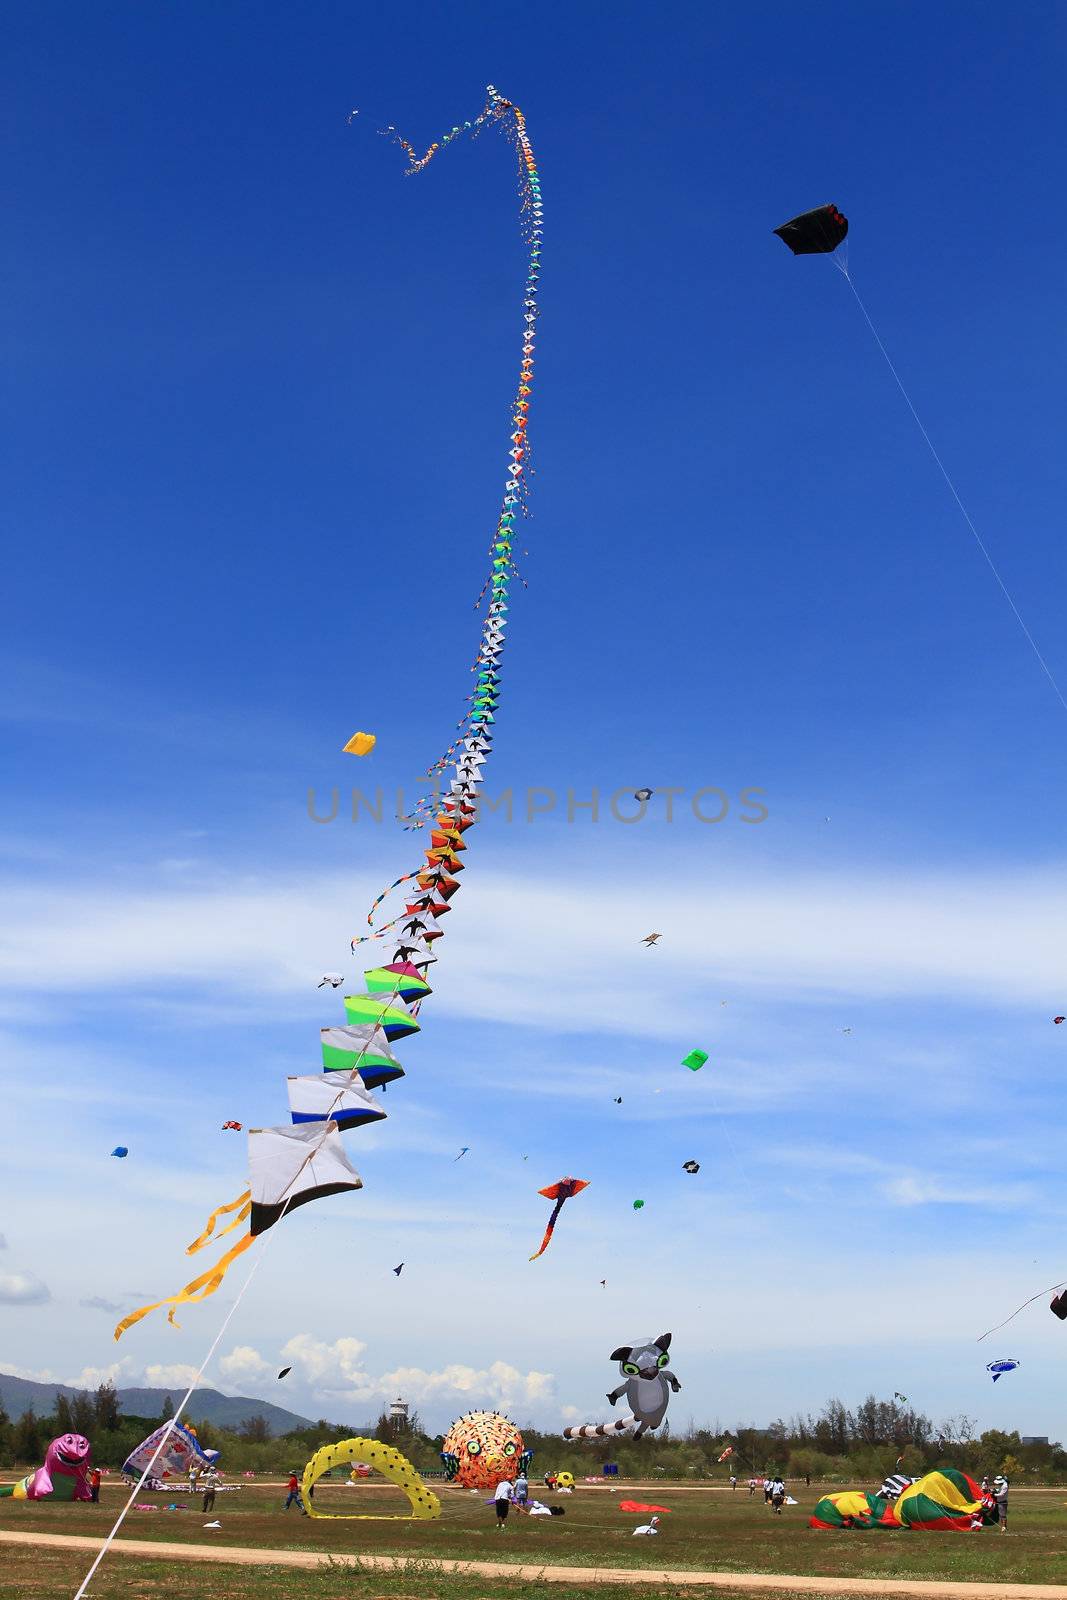 CHA-AM - MARCH 10: Colorful kites in the 12th Thailand International Kite Festival on March 9, 2012 in Naresuan Camp, Cha-am, Thailand